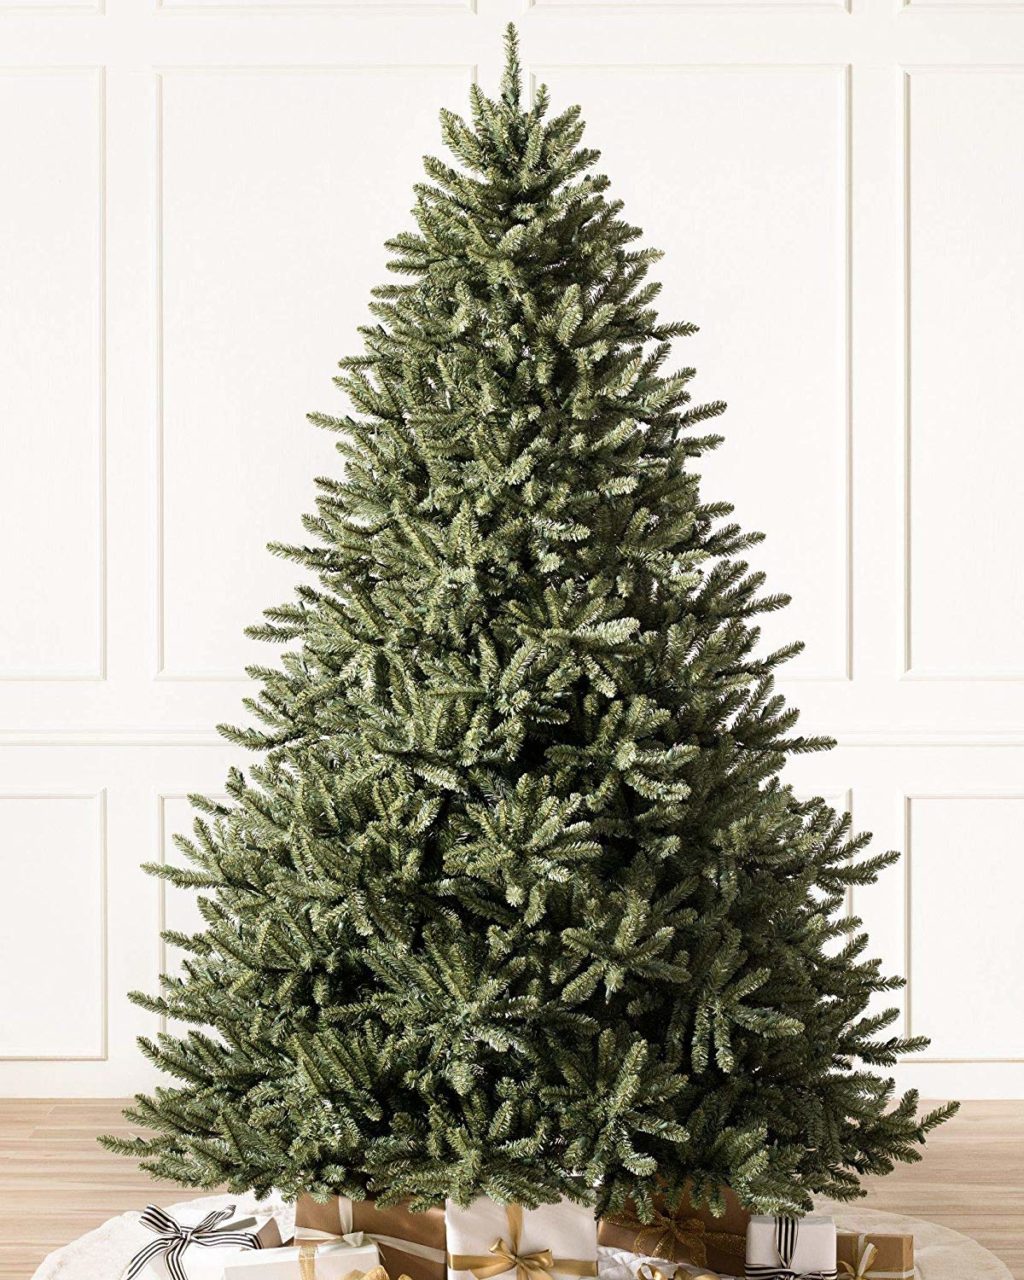 The BEST Artificial Christmas Trees | 6.5' Balsam Hill Blue Spruce Artificial Christmas Tree